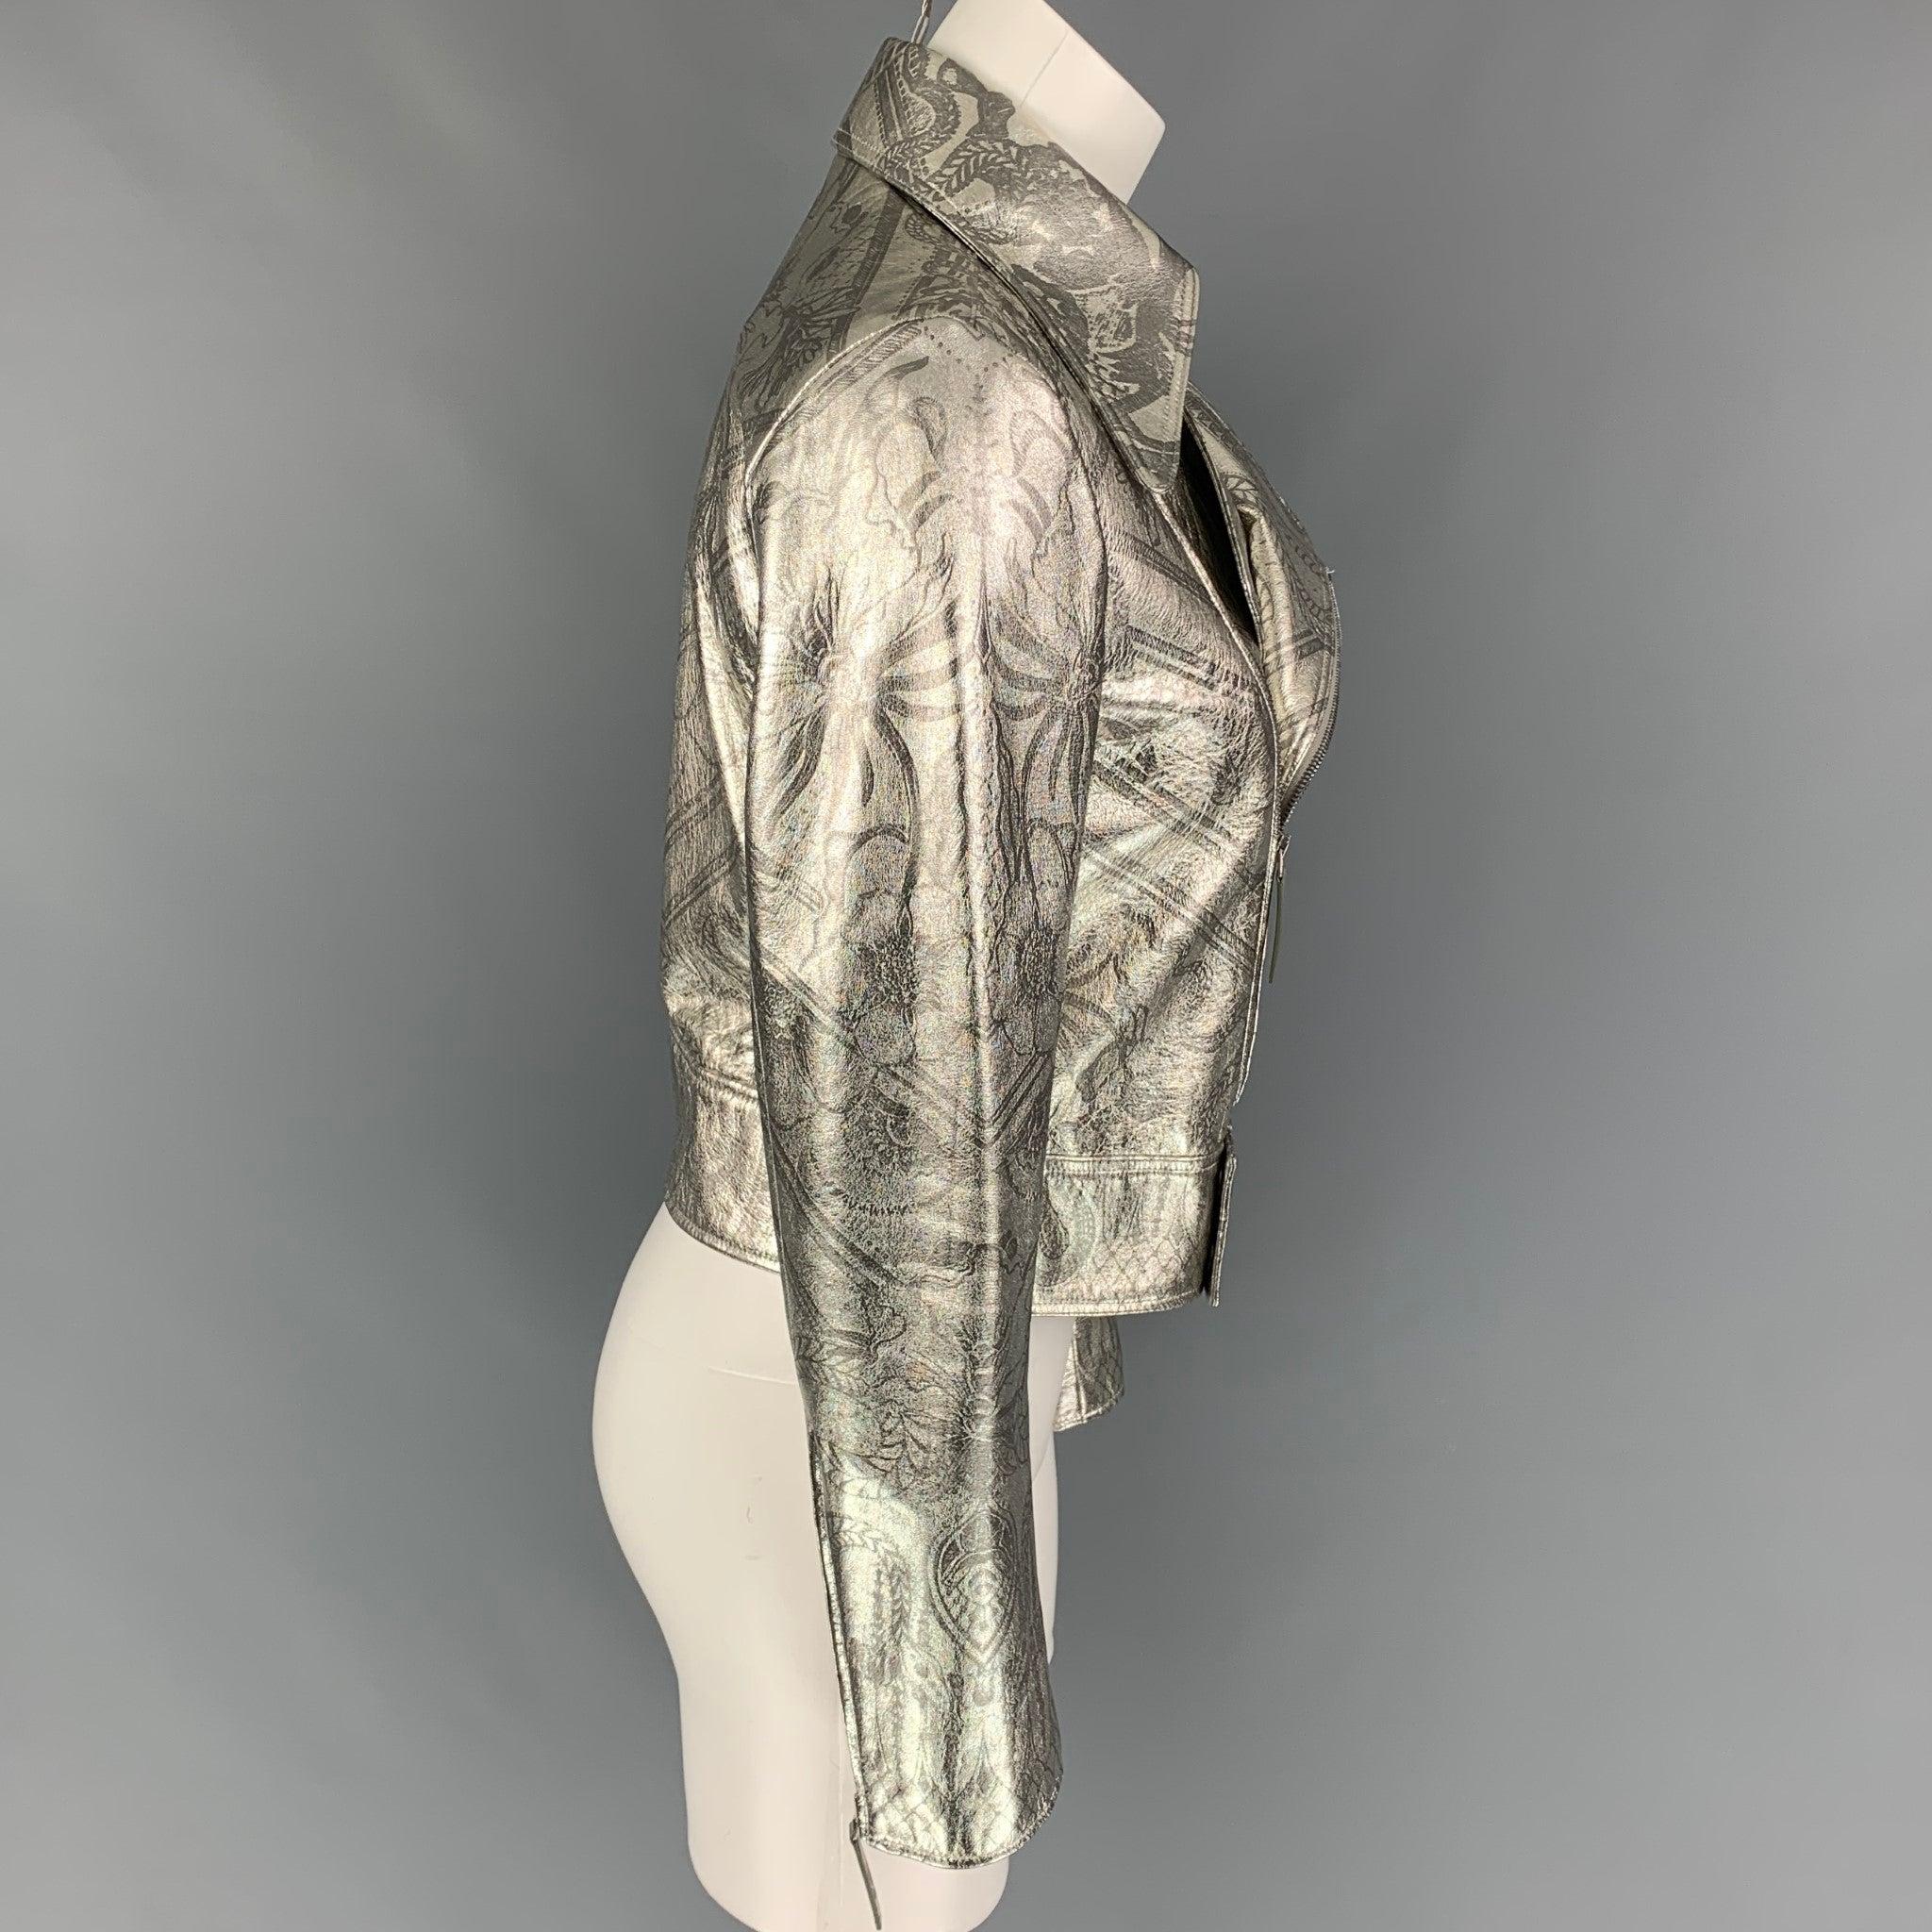 ROBERTO CAVALLI jacket comes in a silver metallic print leather with a full liner featuring a bike style, cropped fit, zipper pockets, and a zip up closure. Made in Italy.
Very Good
Pre-Owned Condition. 

Marked:   40 

Measurements: 
 
Shoulder: 15